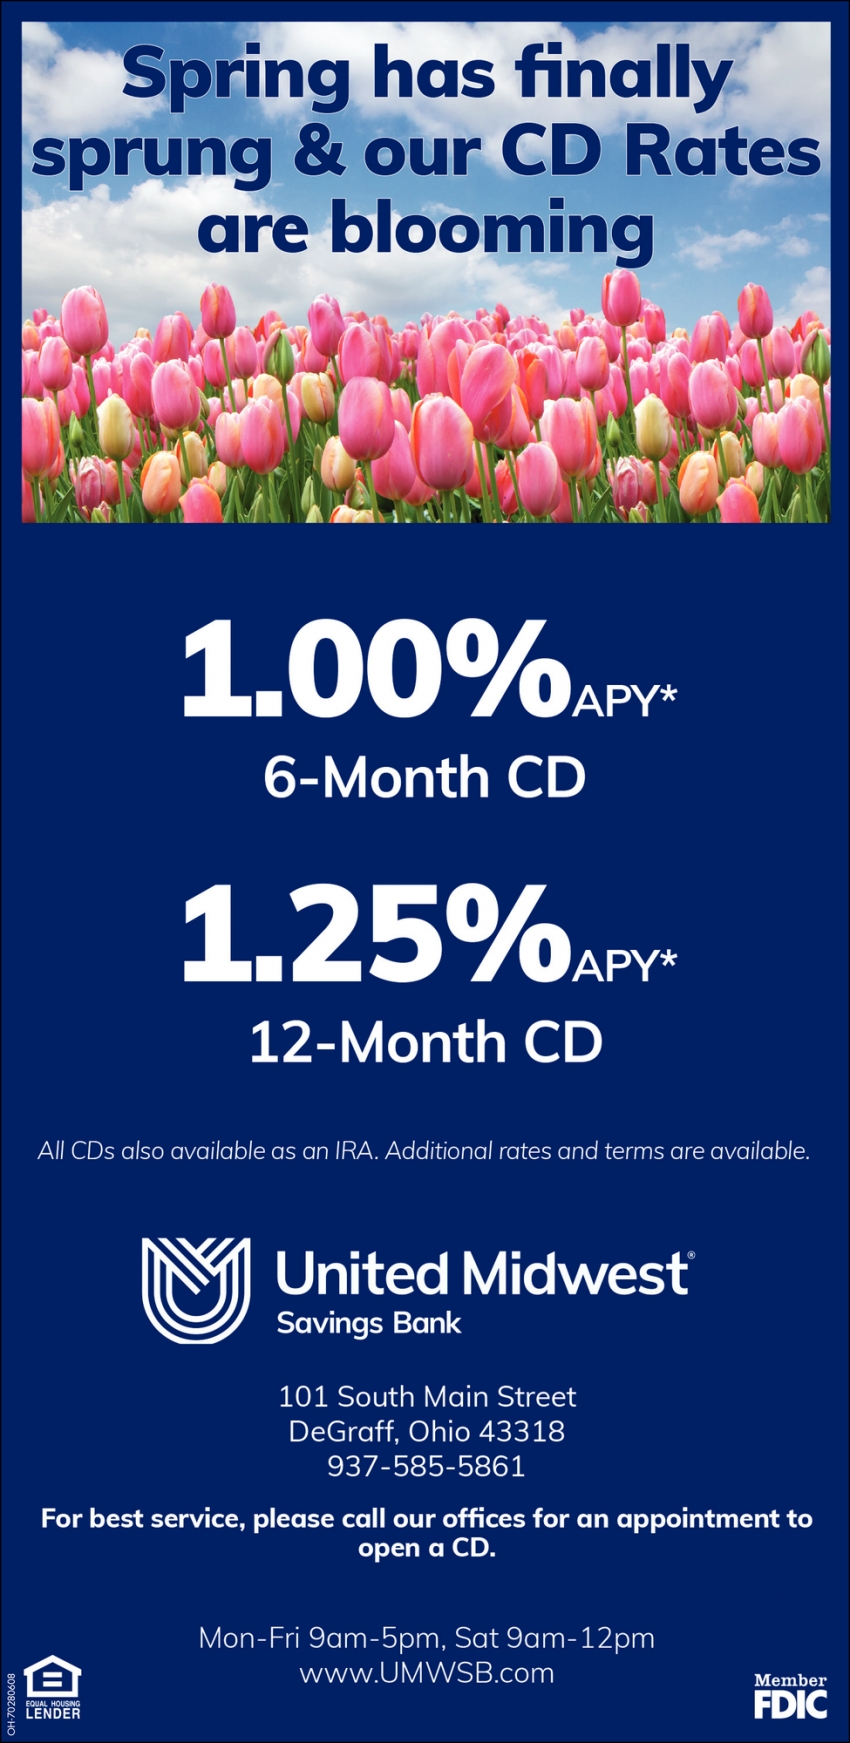 Spring Has Finally Sprung & Our CD Rates Are Blooming